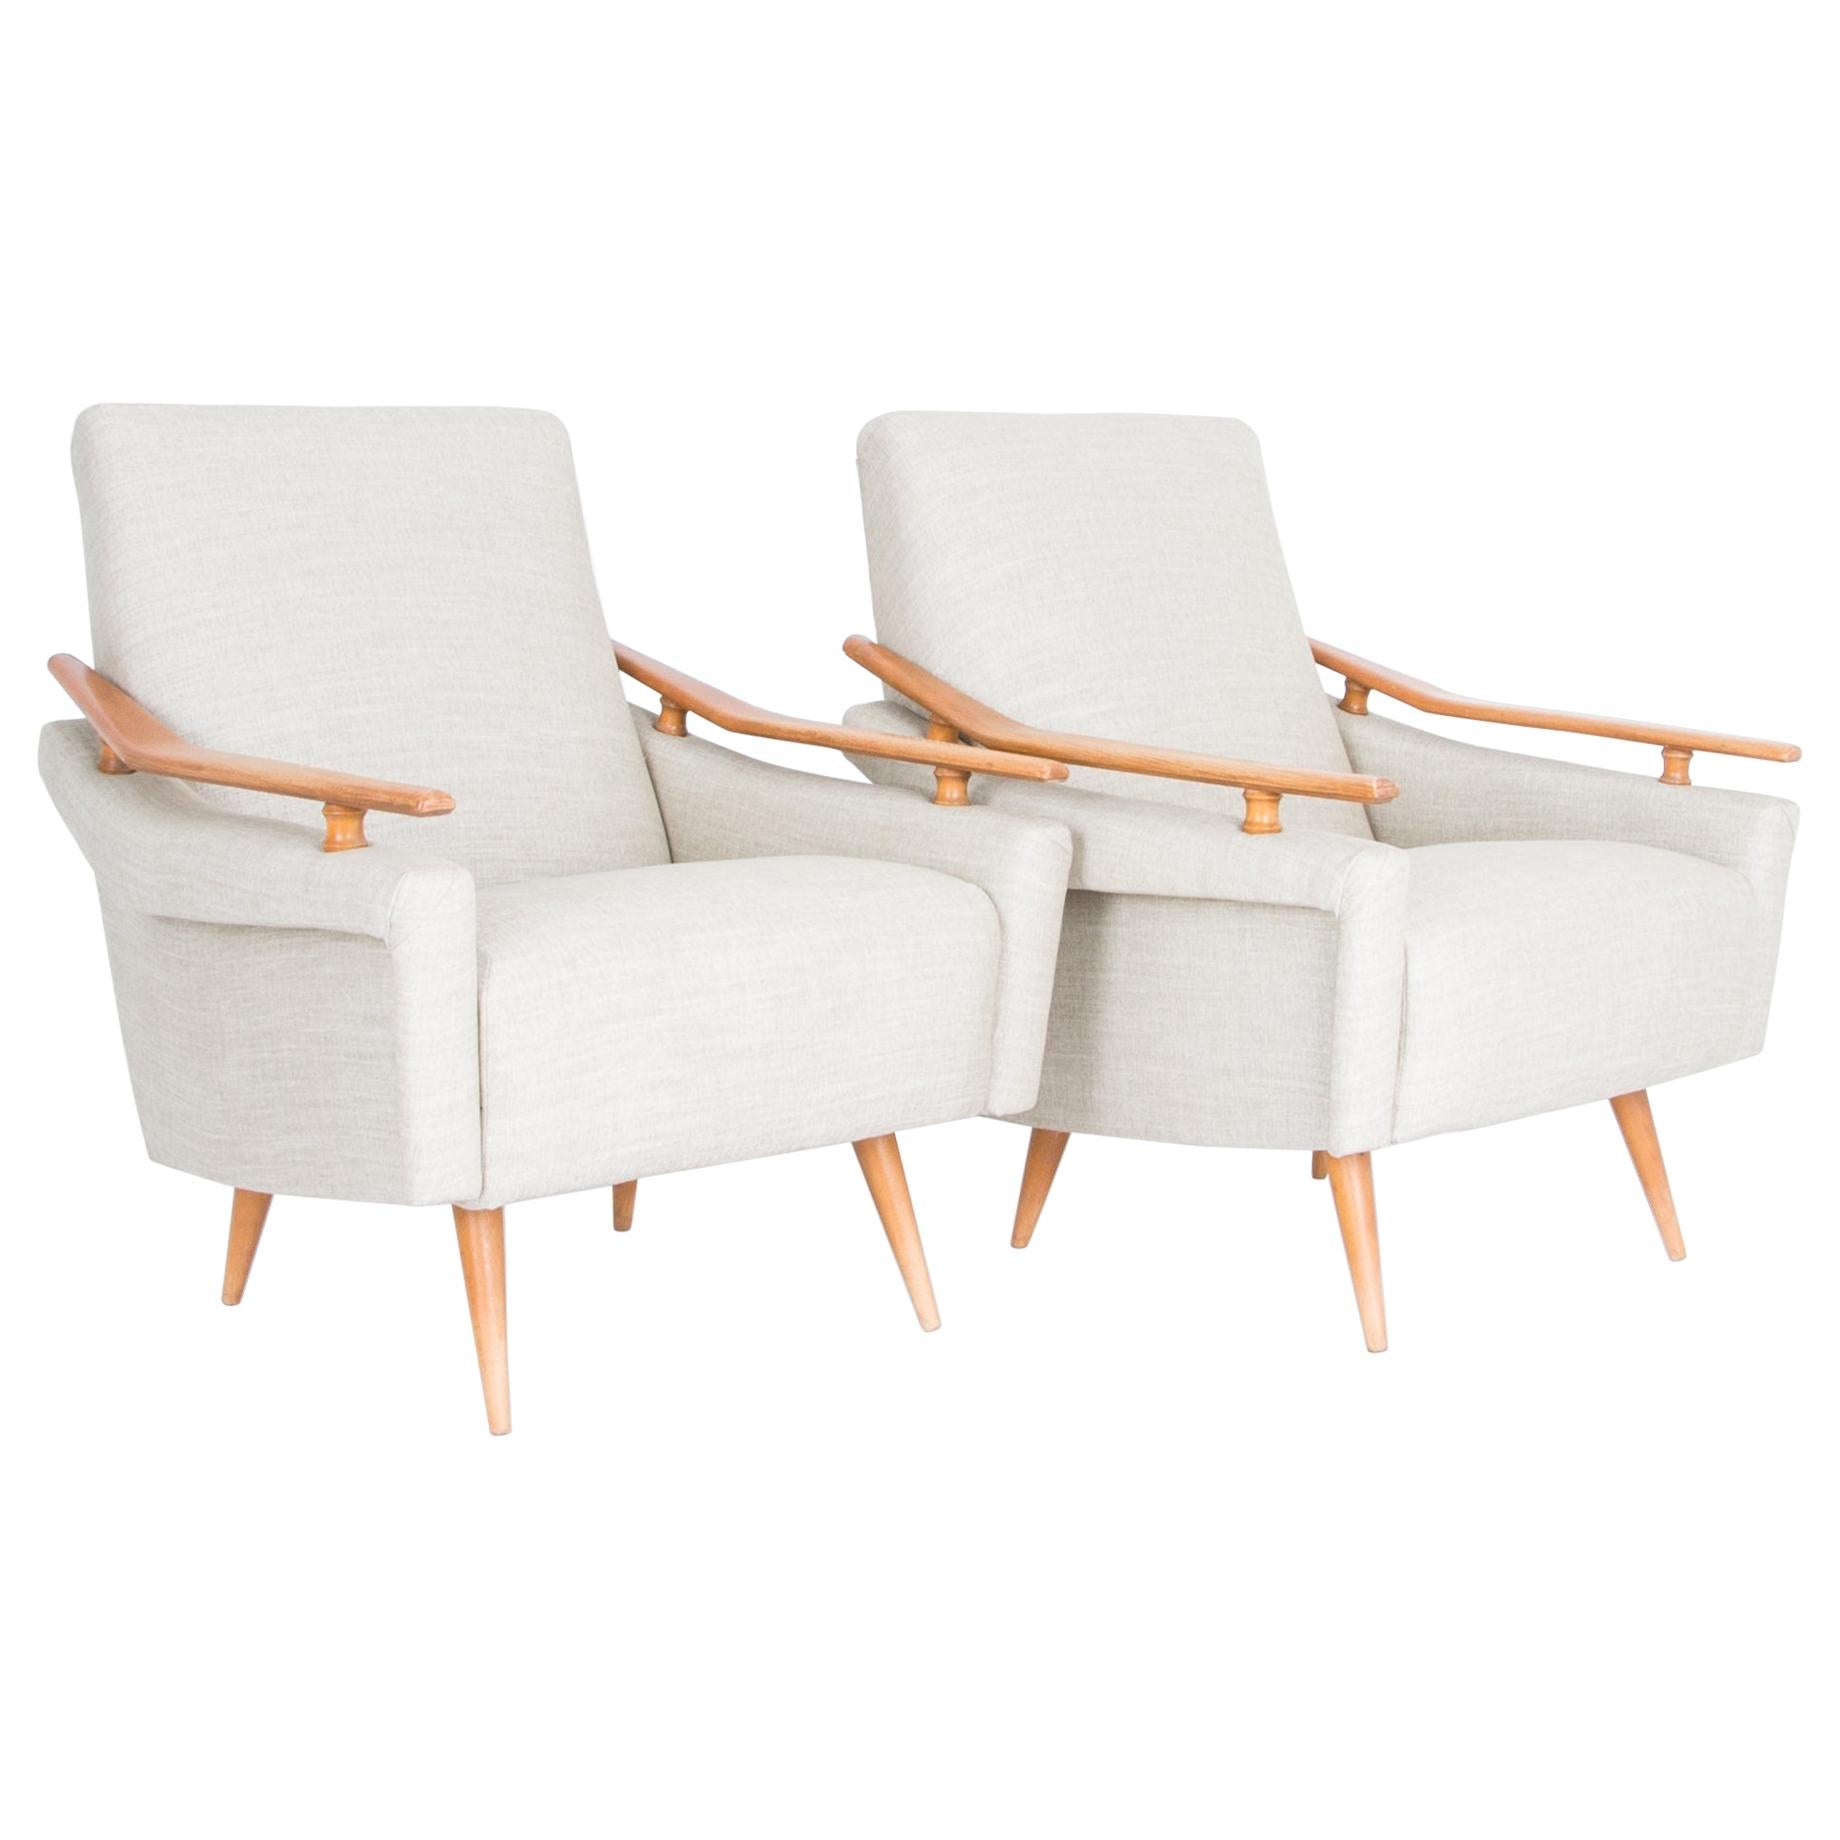 1960s French Mid-Century Modern Armchairs, a Pair